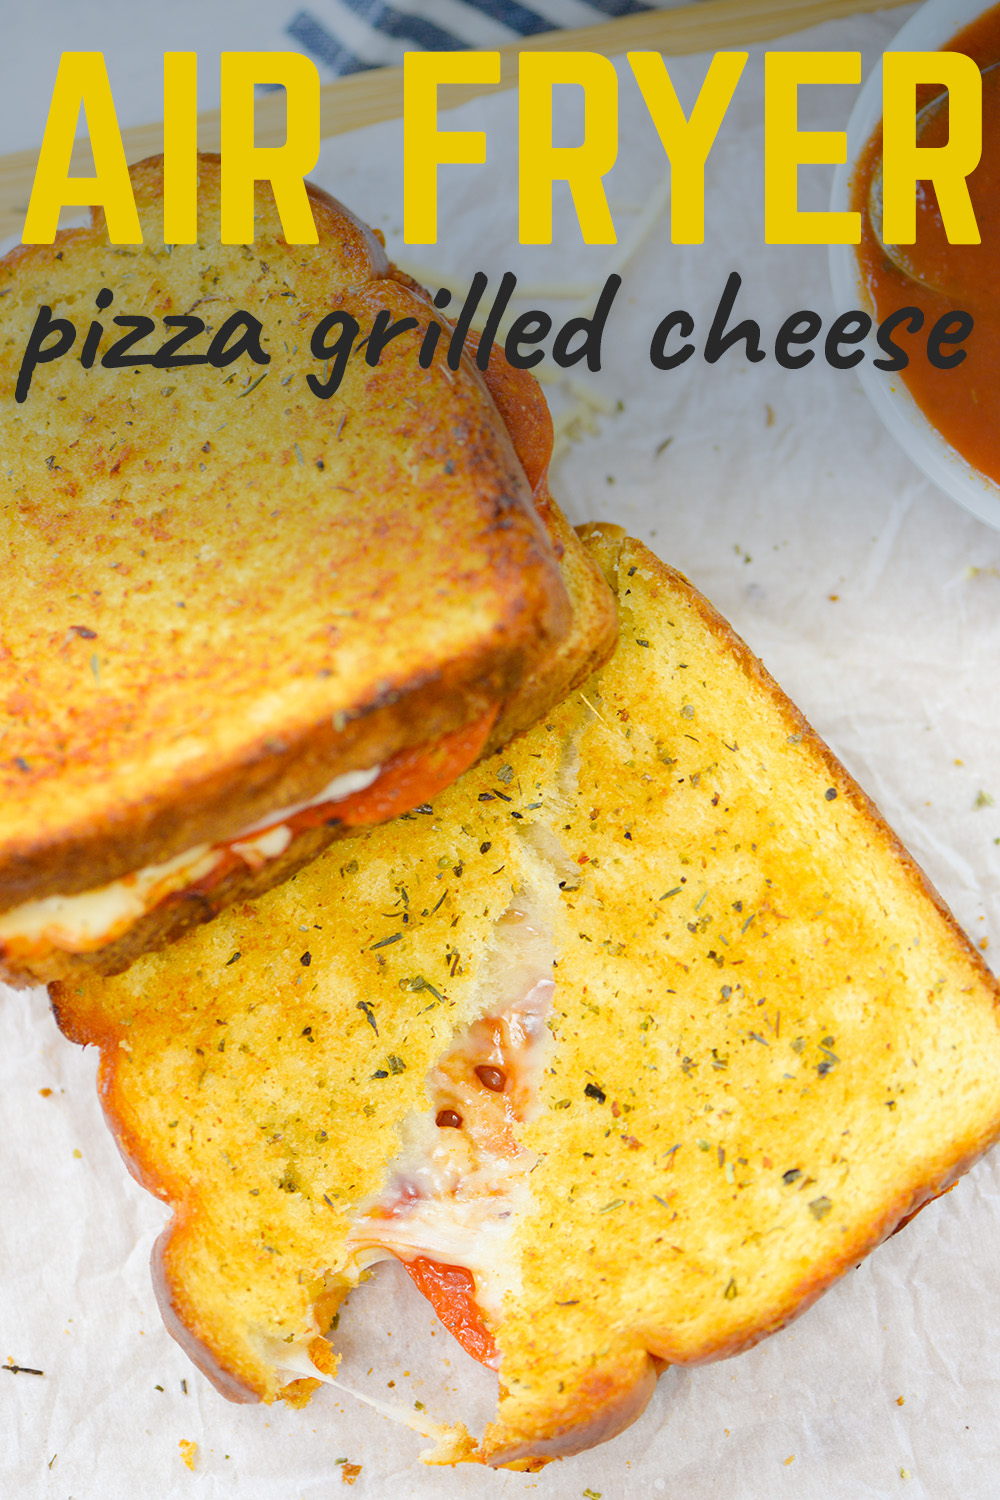 Let's turn that sandwich into pizza! This Pizza Grilled Cheese has everything we love about pizza - gooey cheese, pepperoni, and plenty of sauce - but it's sandwiched between toasty, buttery, garlicky bread!